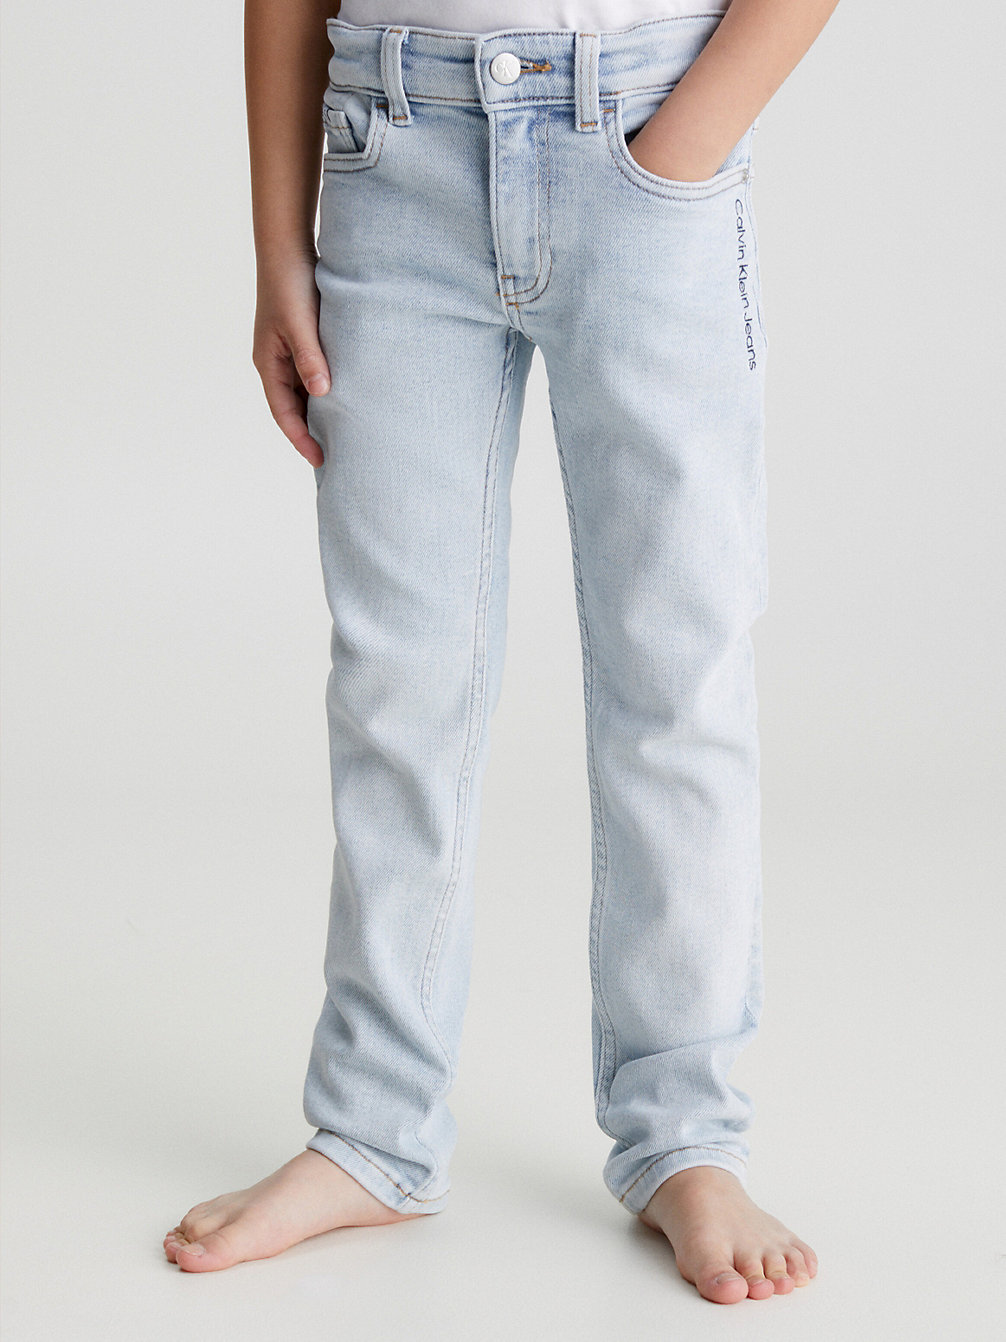 LIGHT BLEACHED STRETCH Jean Slim Mid Rise undefined boys Calvin Klein